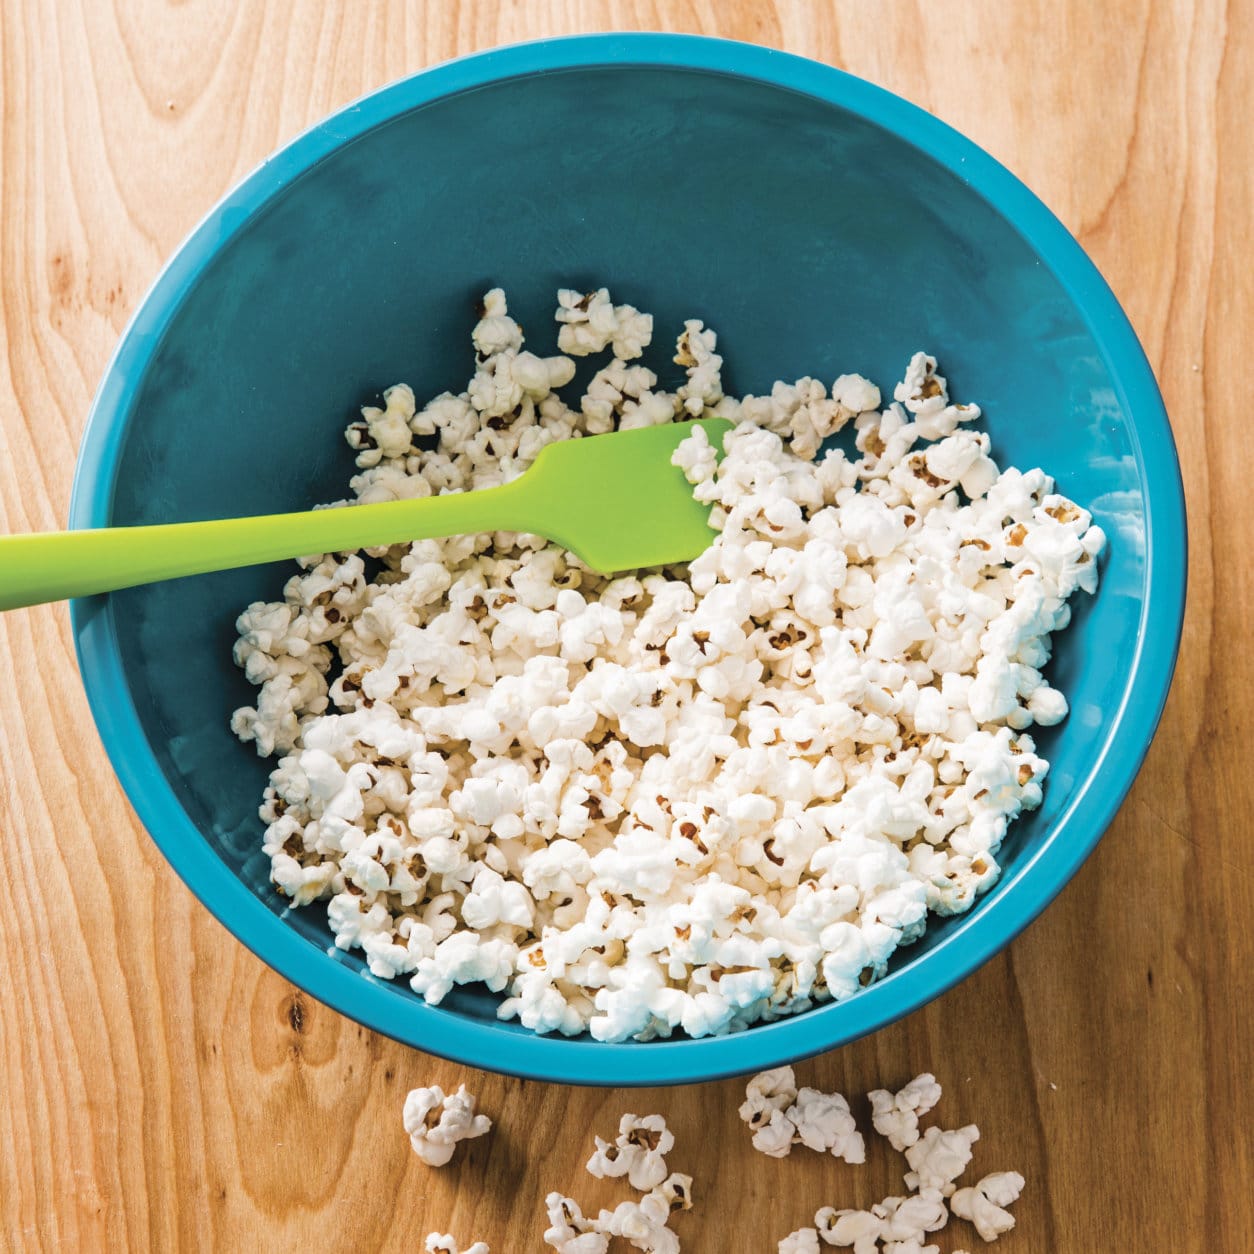 This undated photo provided by America's Test Kitchen in January 2019 shows Real Buttered Popcorn in Brookline, Mass. This recipe appears in the cookbook "Complete Cookbook for Young Chefs." (Joe Keller/America's Test Kitchen via AP)